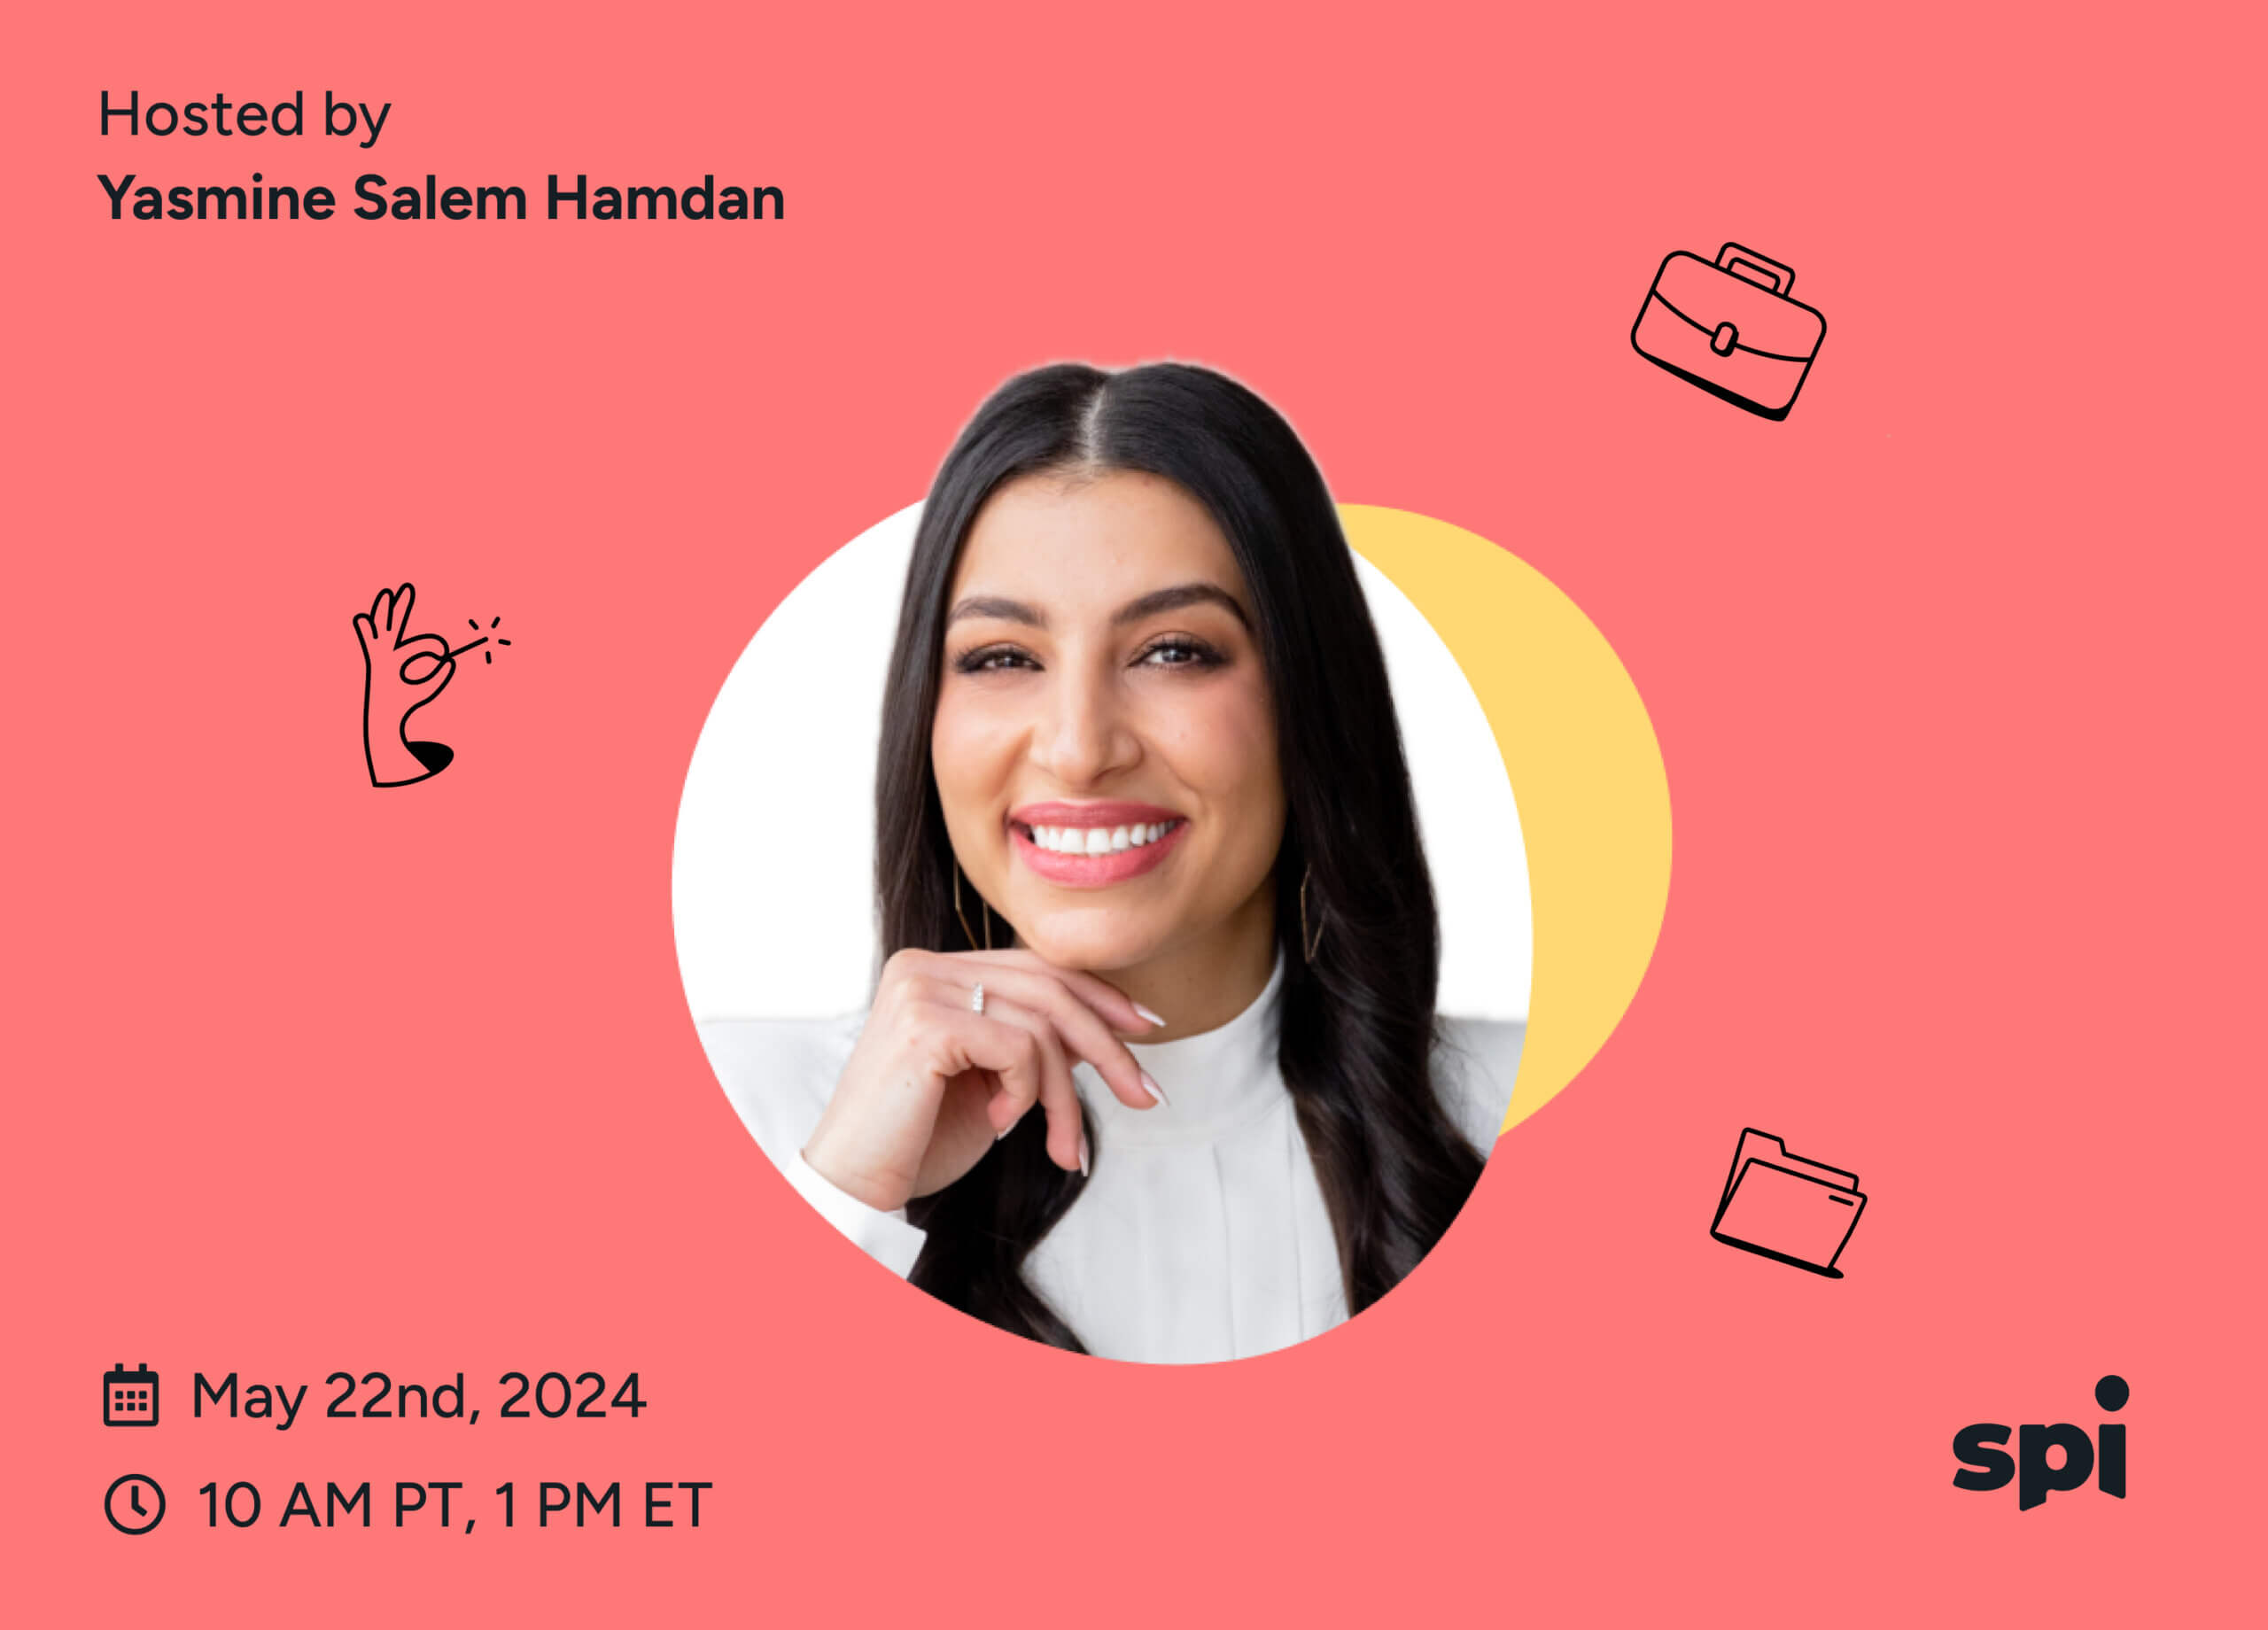 Hosted by Yasmine Salem Hamdan on May 22, 2024 at 10 AM PT/1 PM ET